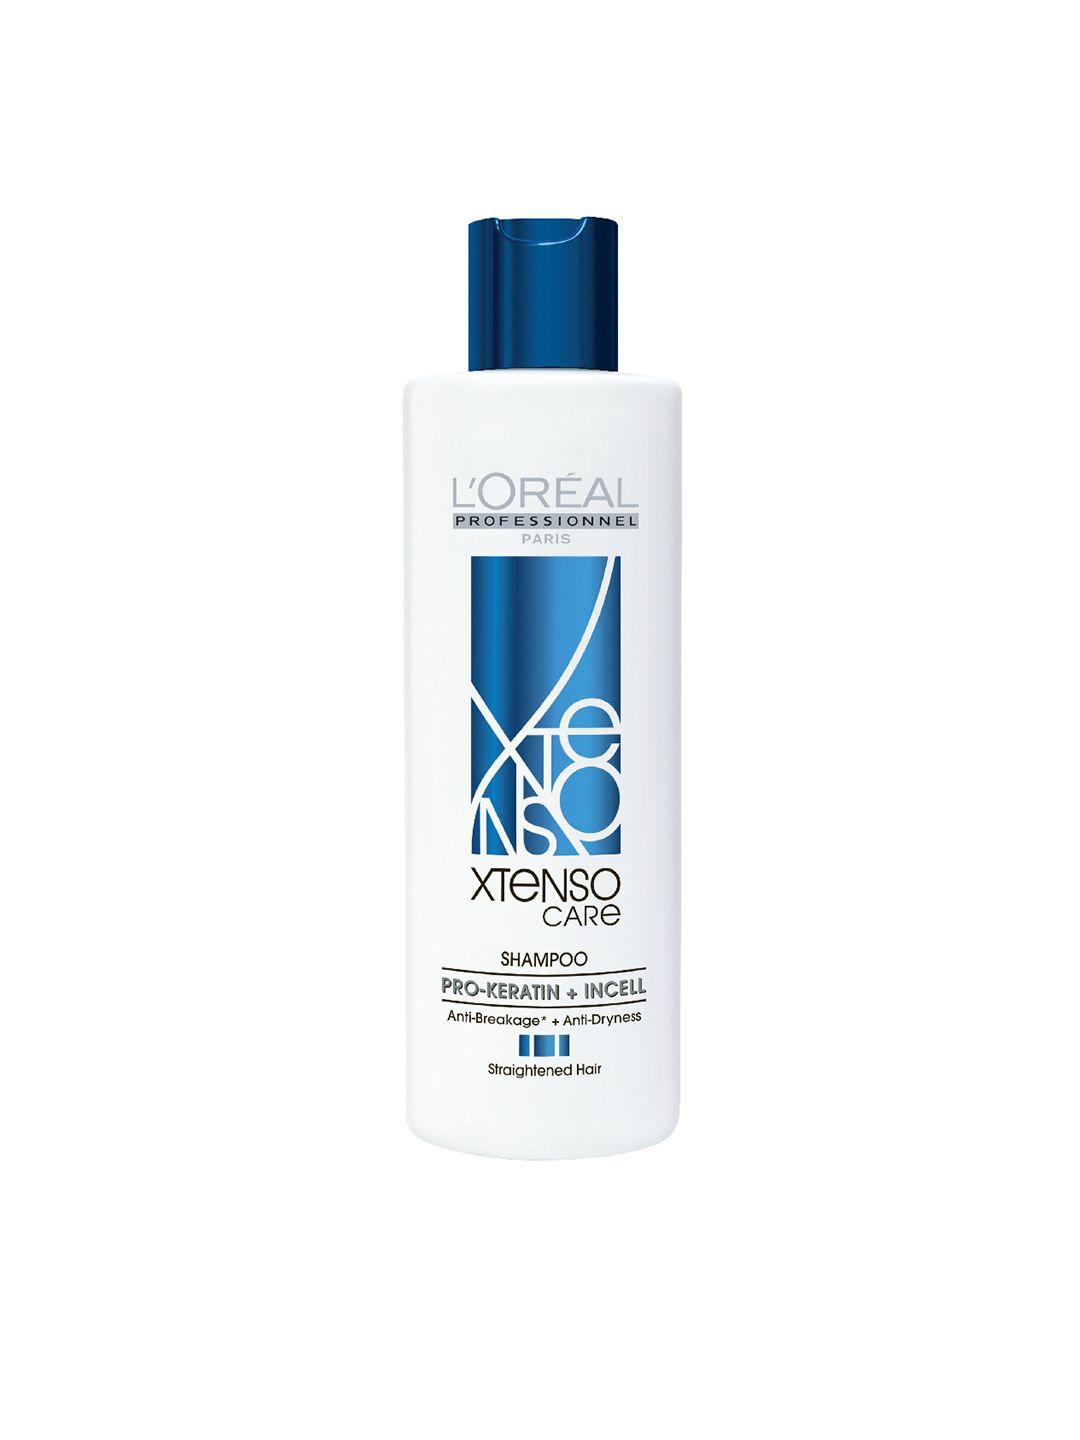 loreal professionnel xtenso care shampoo with pro-keratine for straightened hair-250ml